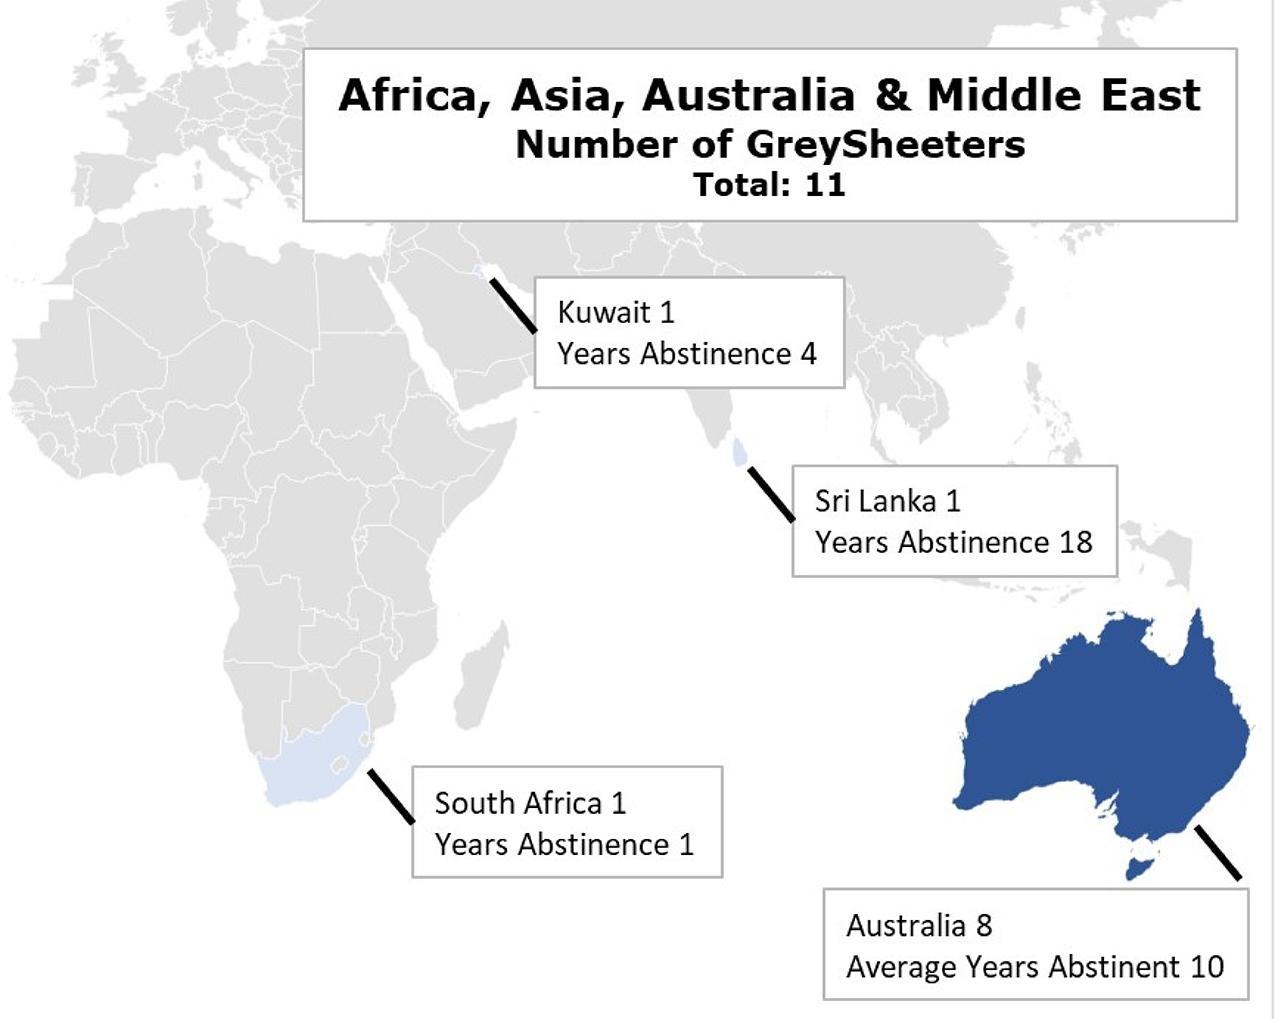 Map showing the number of GreySheeters in South Africa, Kuwait, Sri Lanka, and Australia